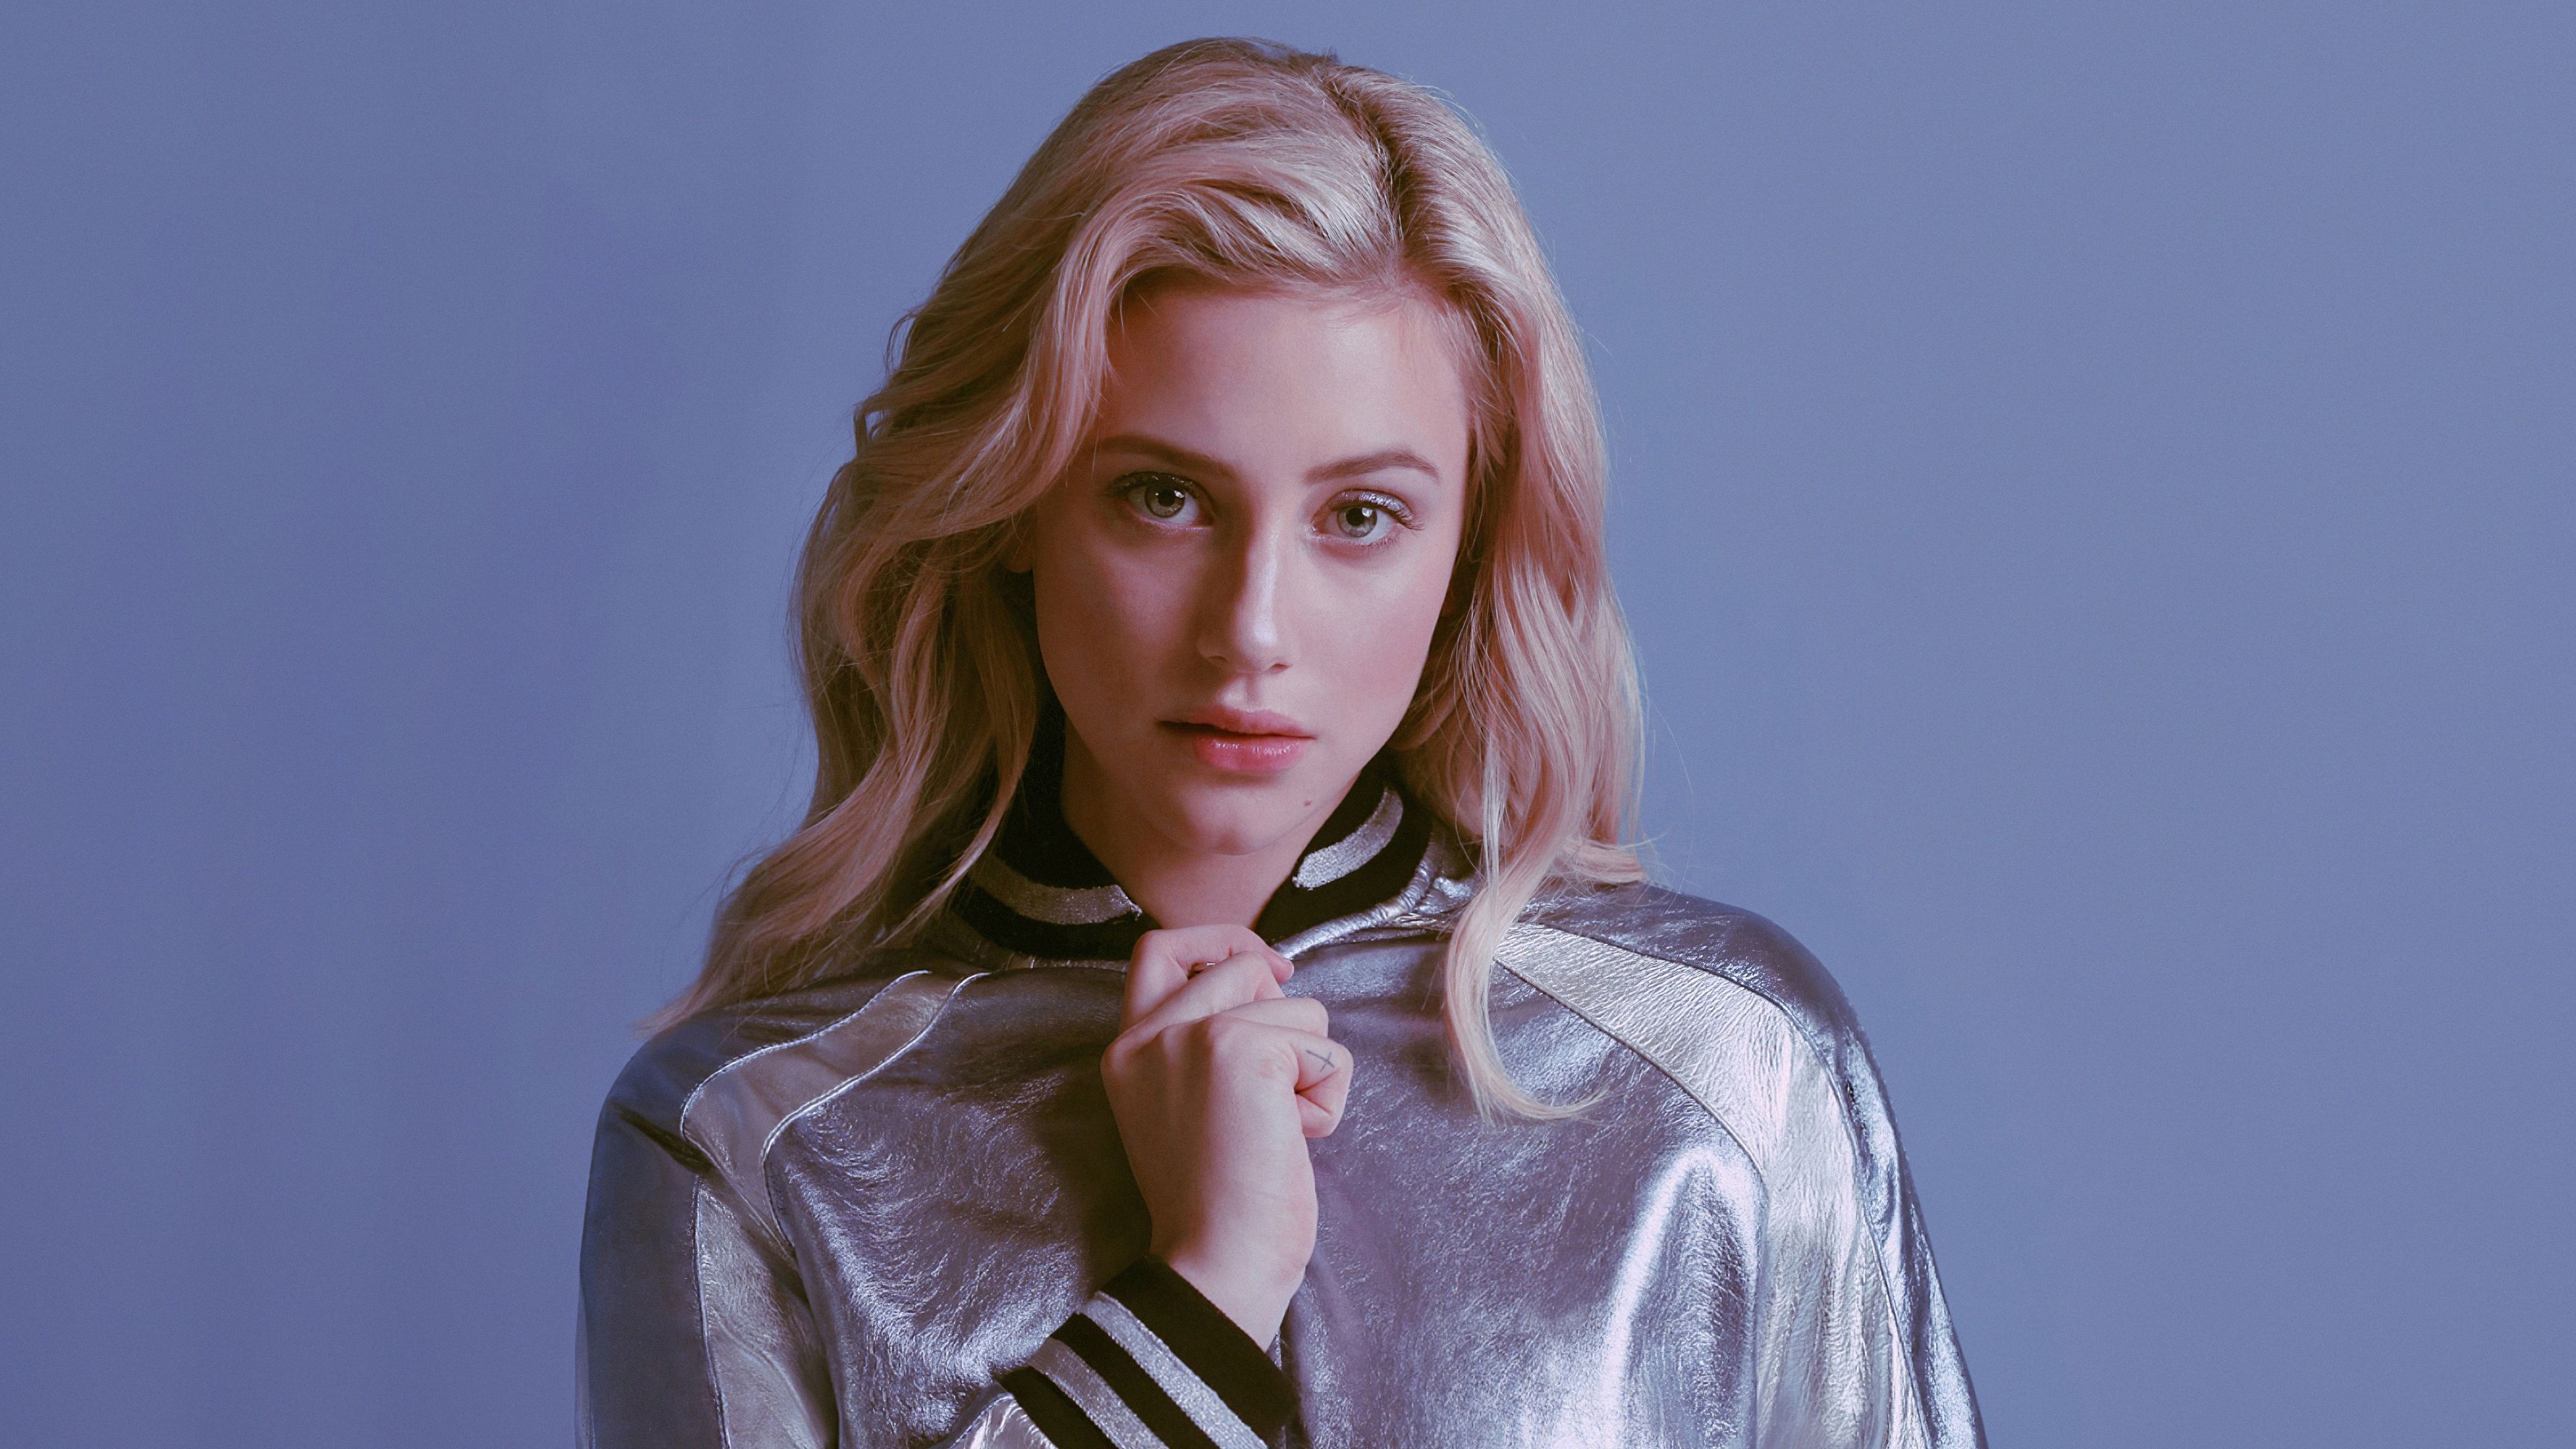 Most Beautiful Women: Lili Reinhart, An American actress, Known for portraying Betty Cooper on The CW series “Riverdale”. 3840x2160 4K Background.